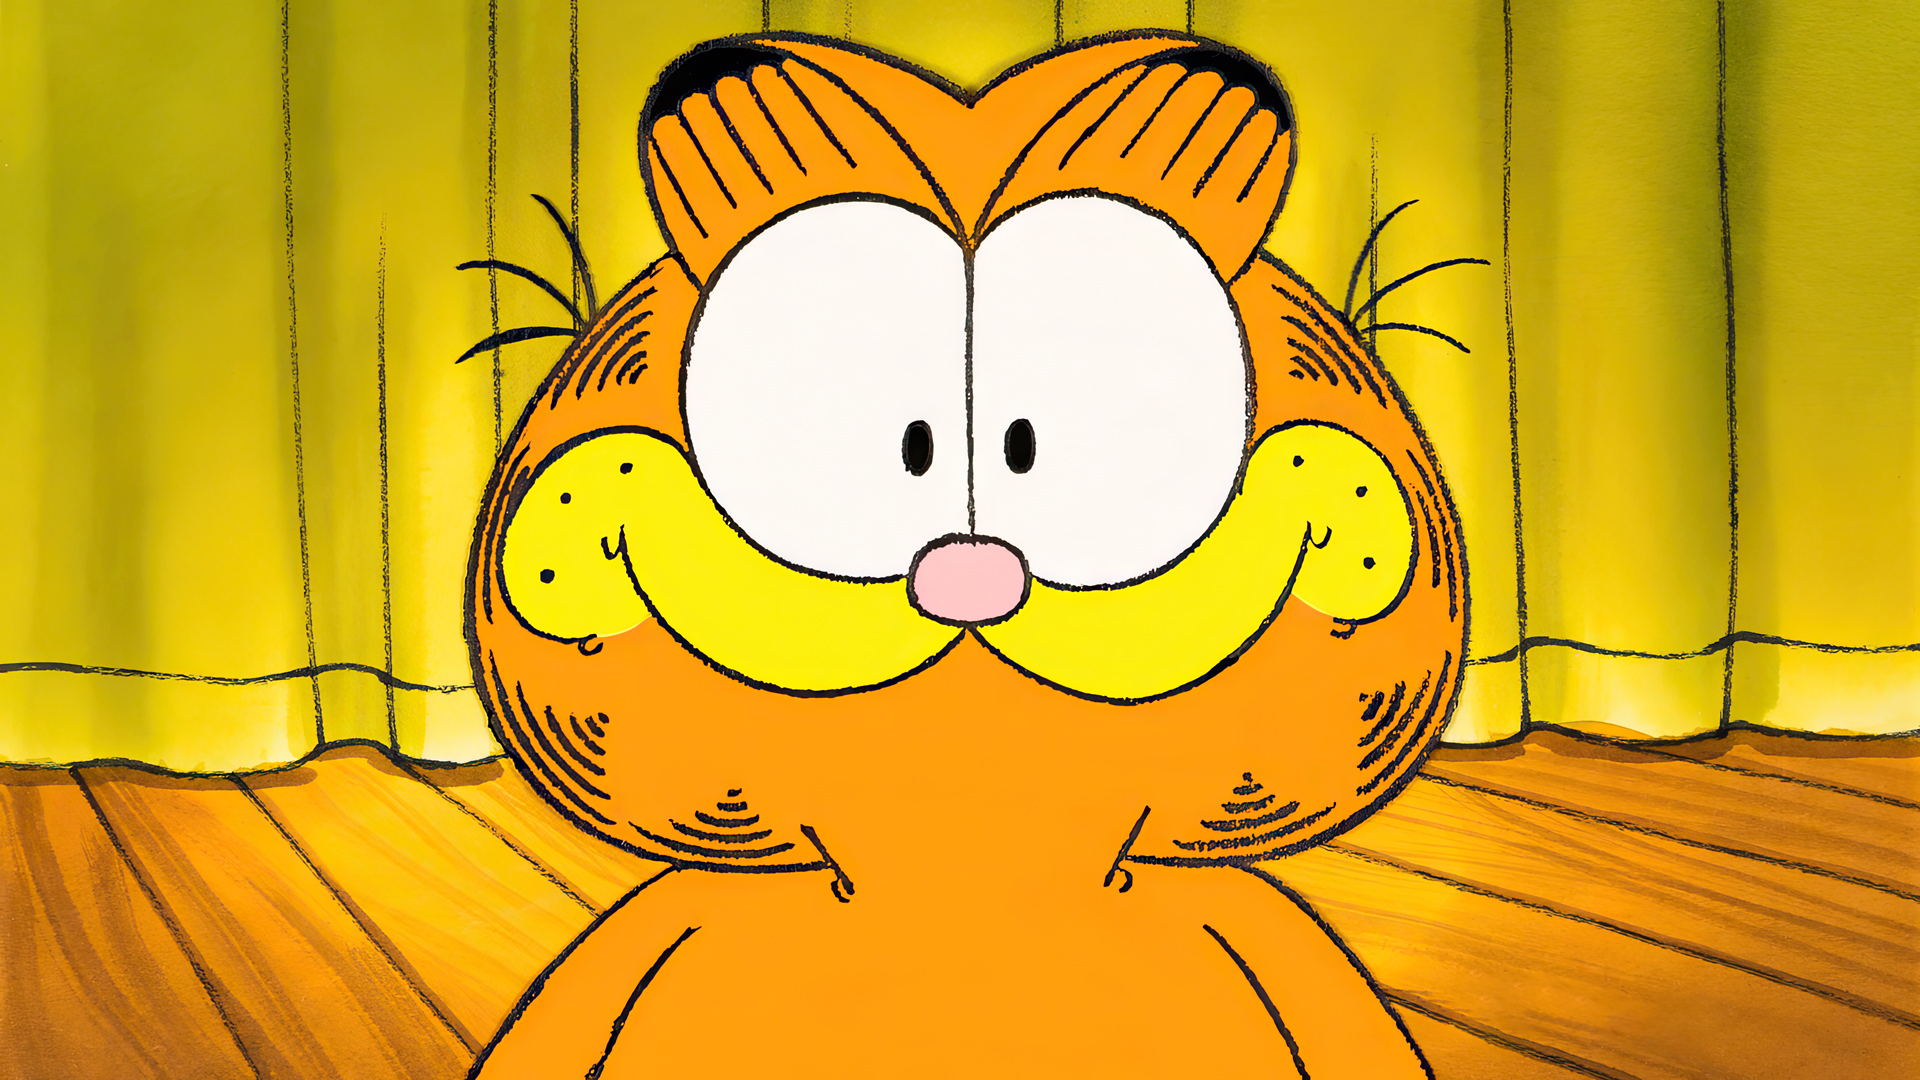 Garfield And Friends Garfield Animation Animated Series Cartoon Production Cel Cats Animals Smiling 1920x1080